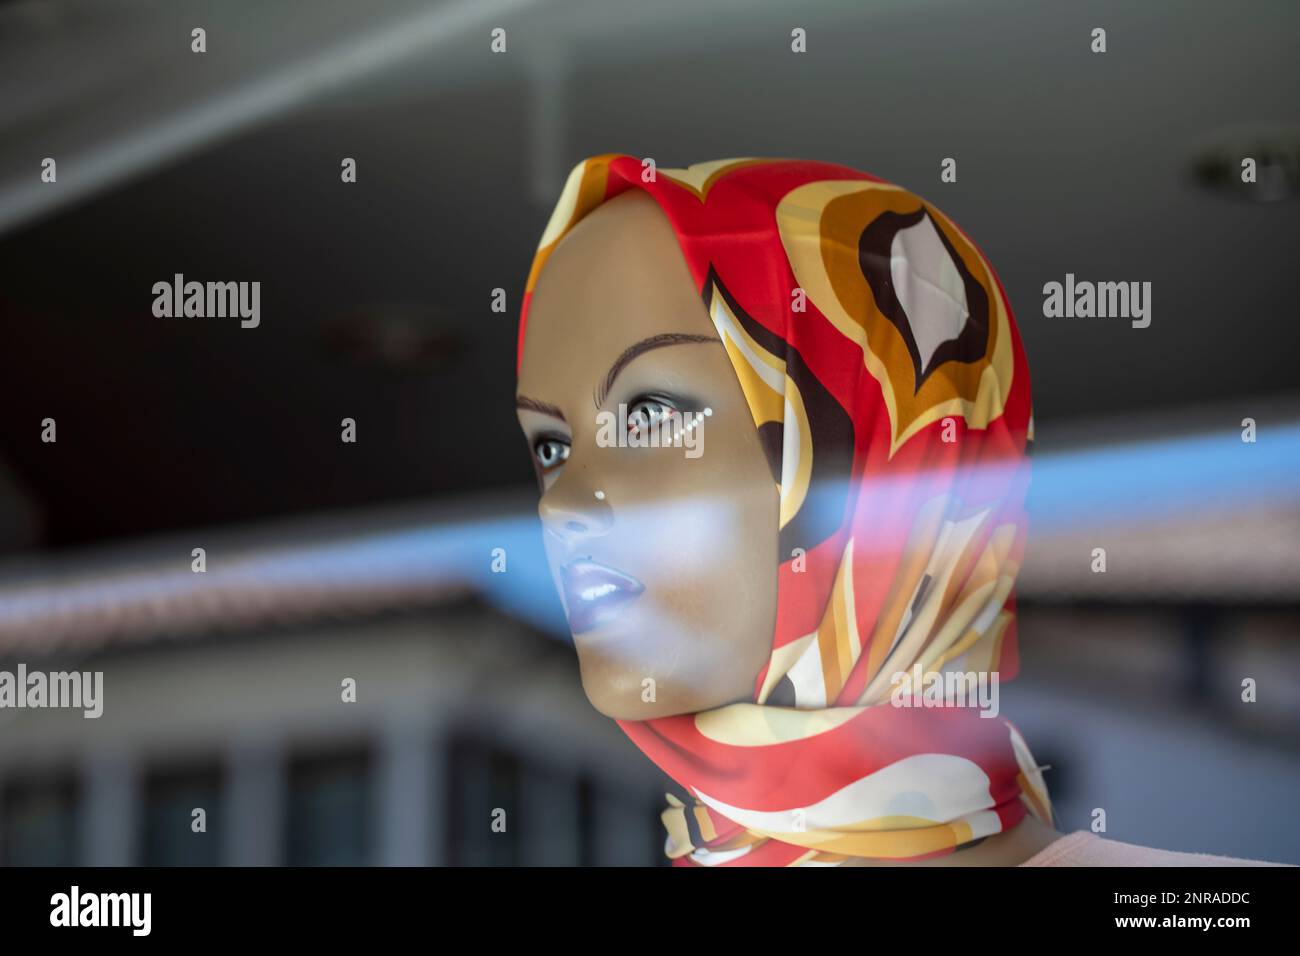 A mannequin for displaying the hijab,  religion and belief concept Stock Photo